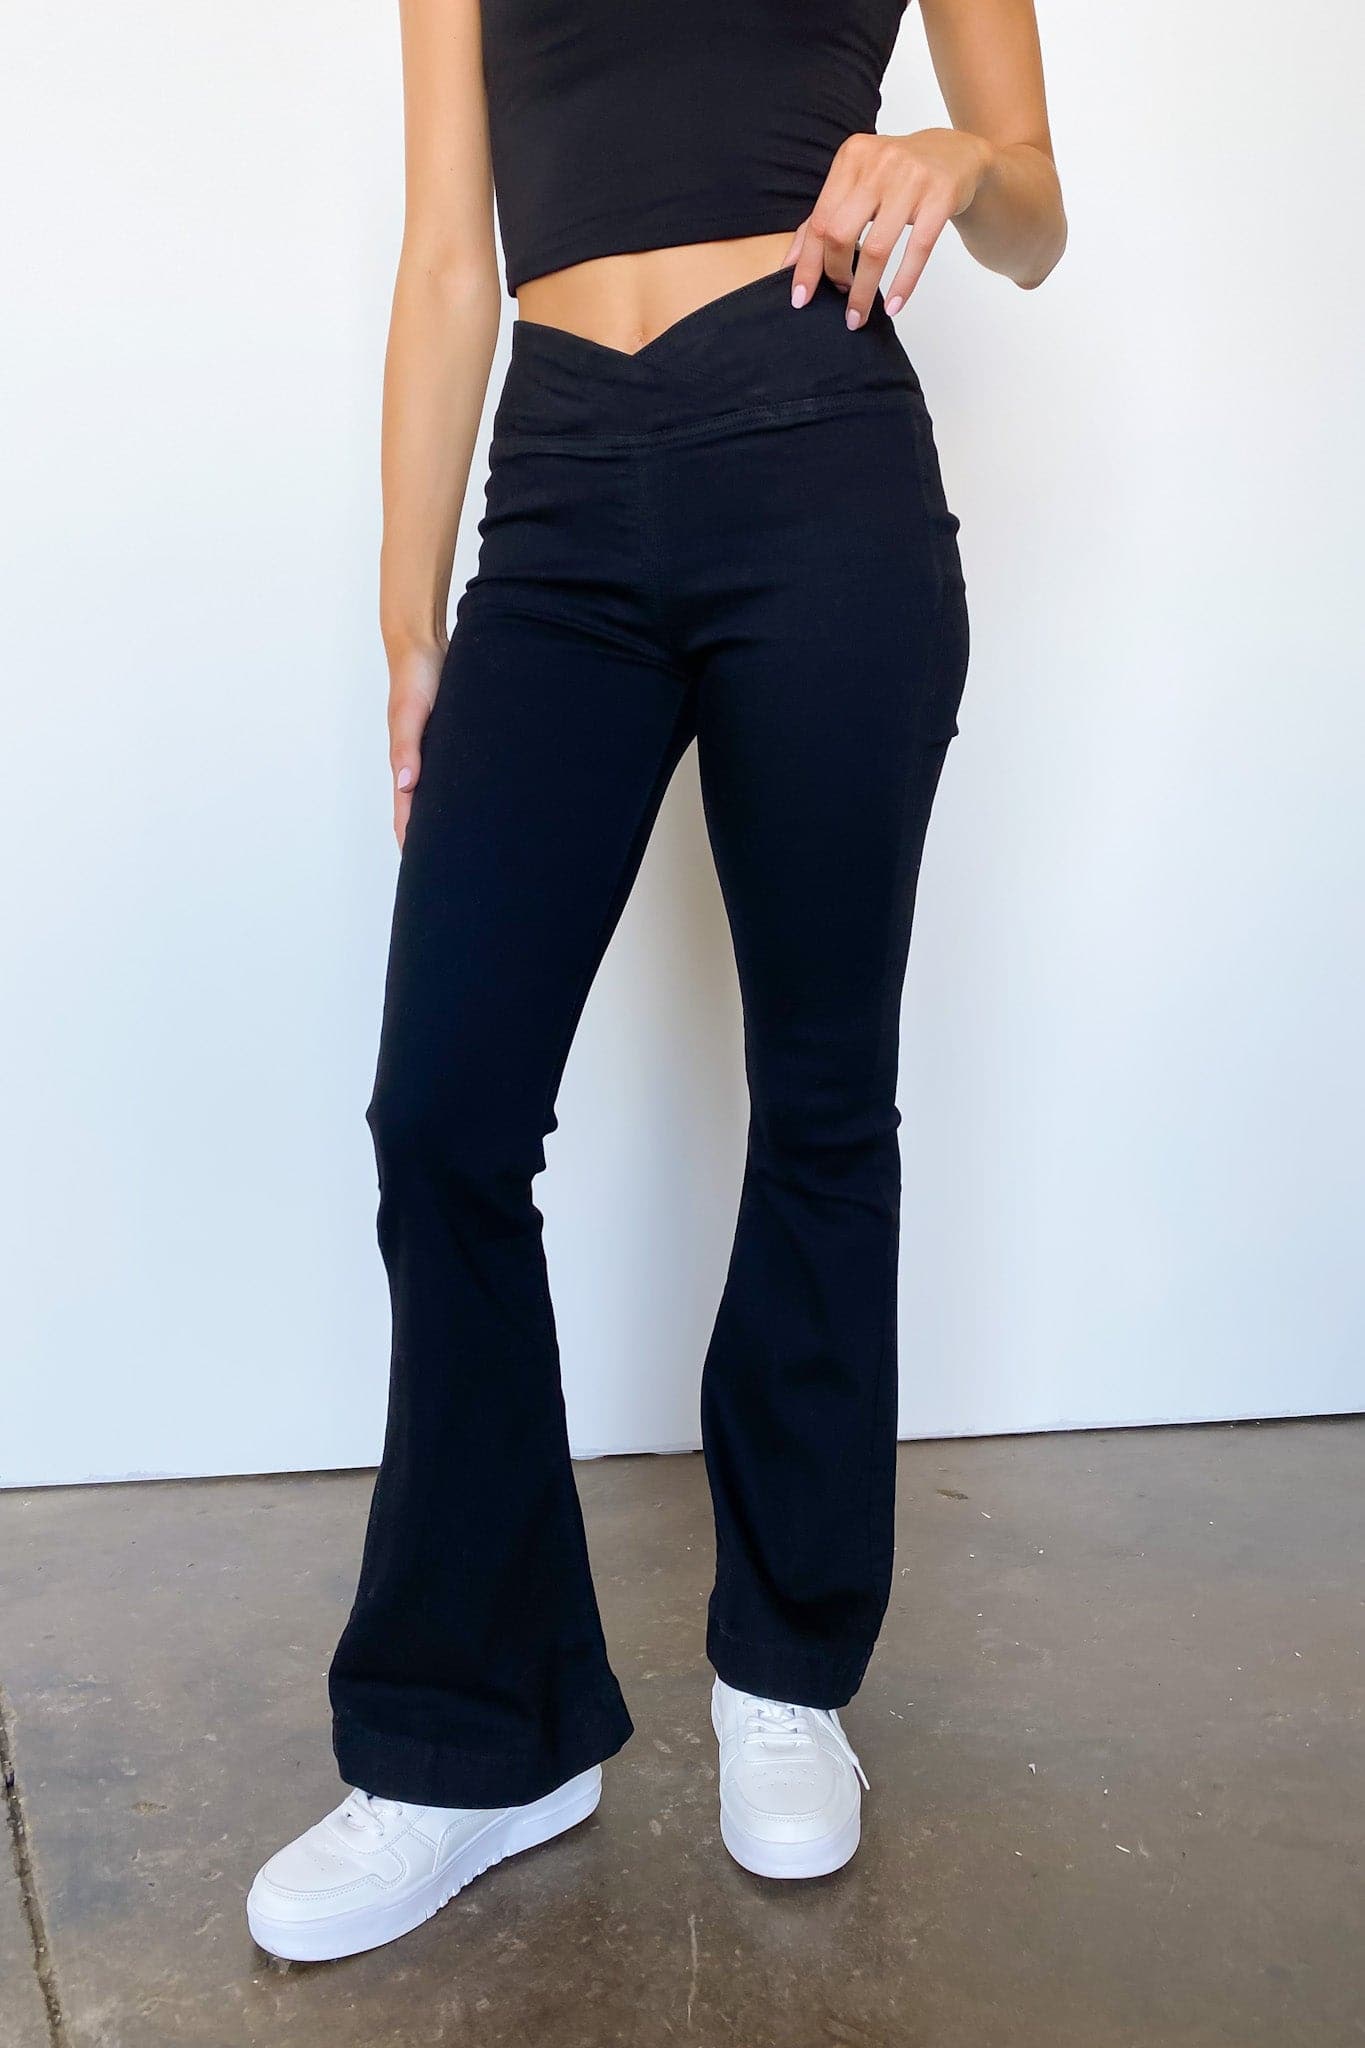 S / Black Alaiah Crossover V-Waist Pull On Flare Jeans - Madison and Mallory